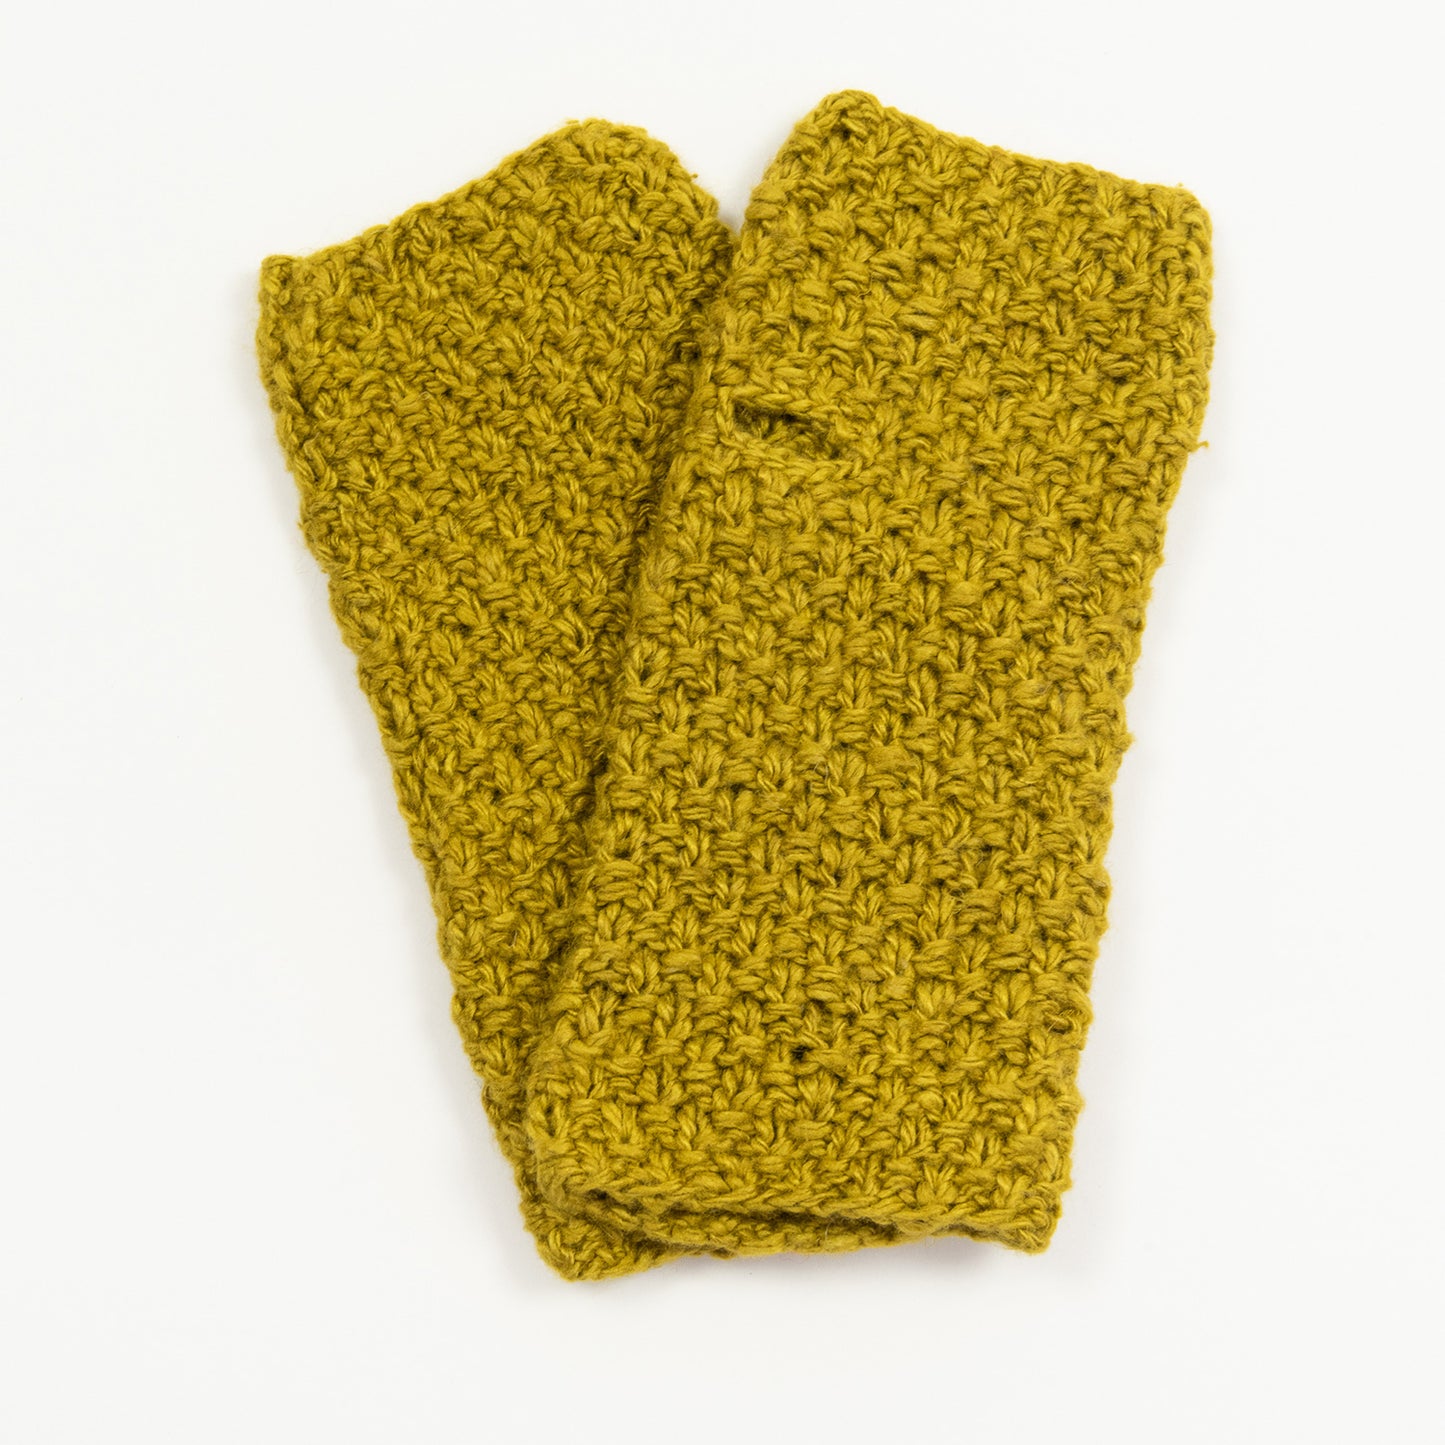 Two mustard-yellow wristwarmers pictured on a white background.